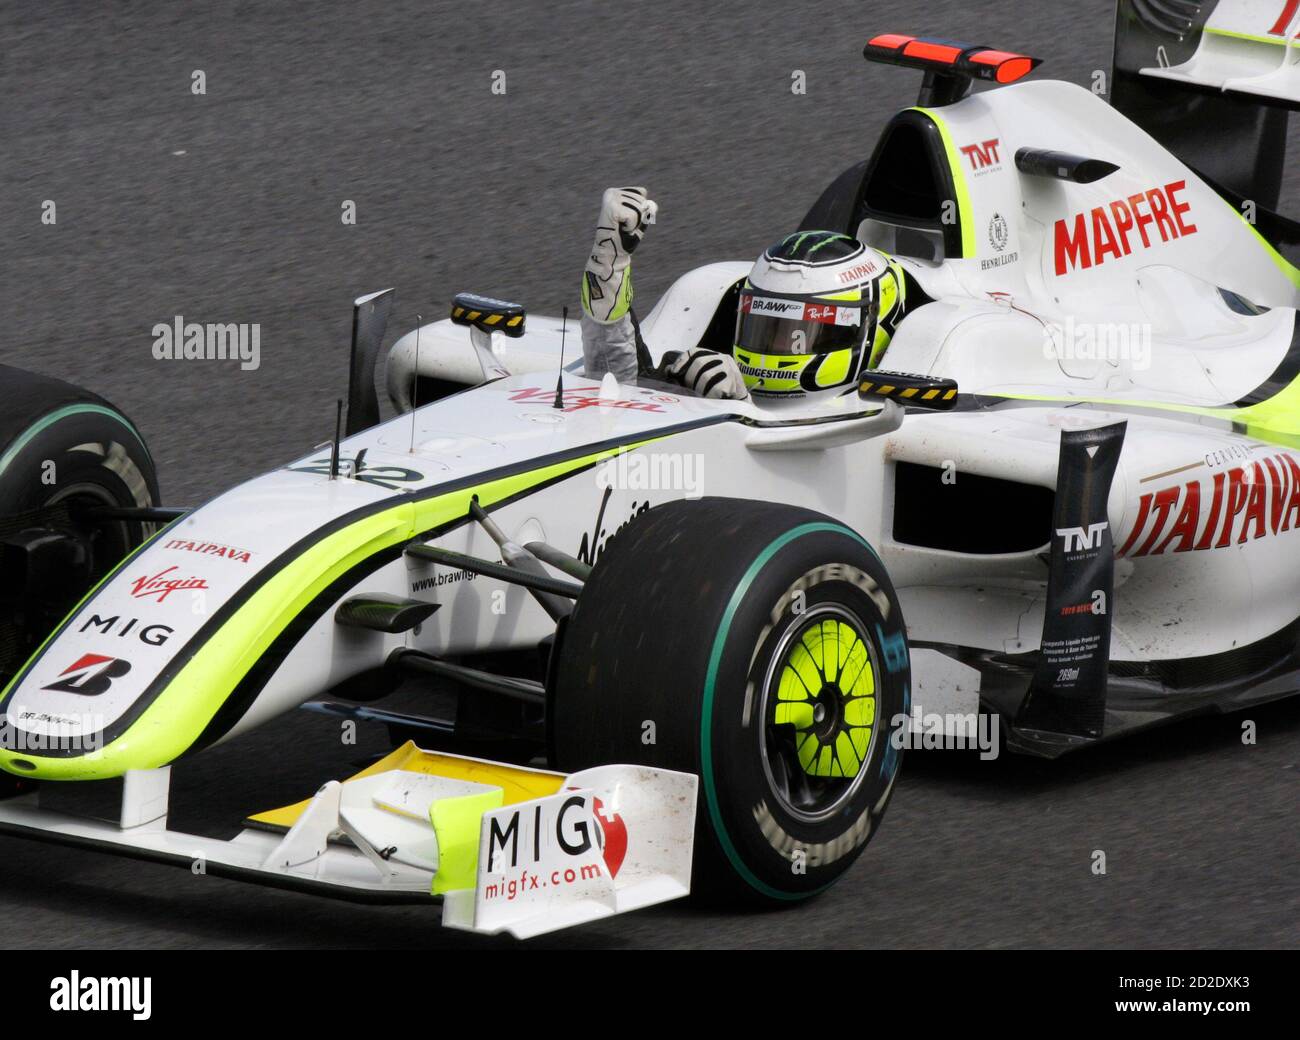 Brawn Gp 2009 High Resolution Stock Photography and Images - Alamy